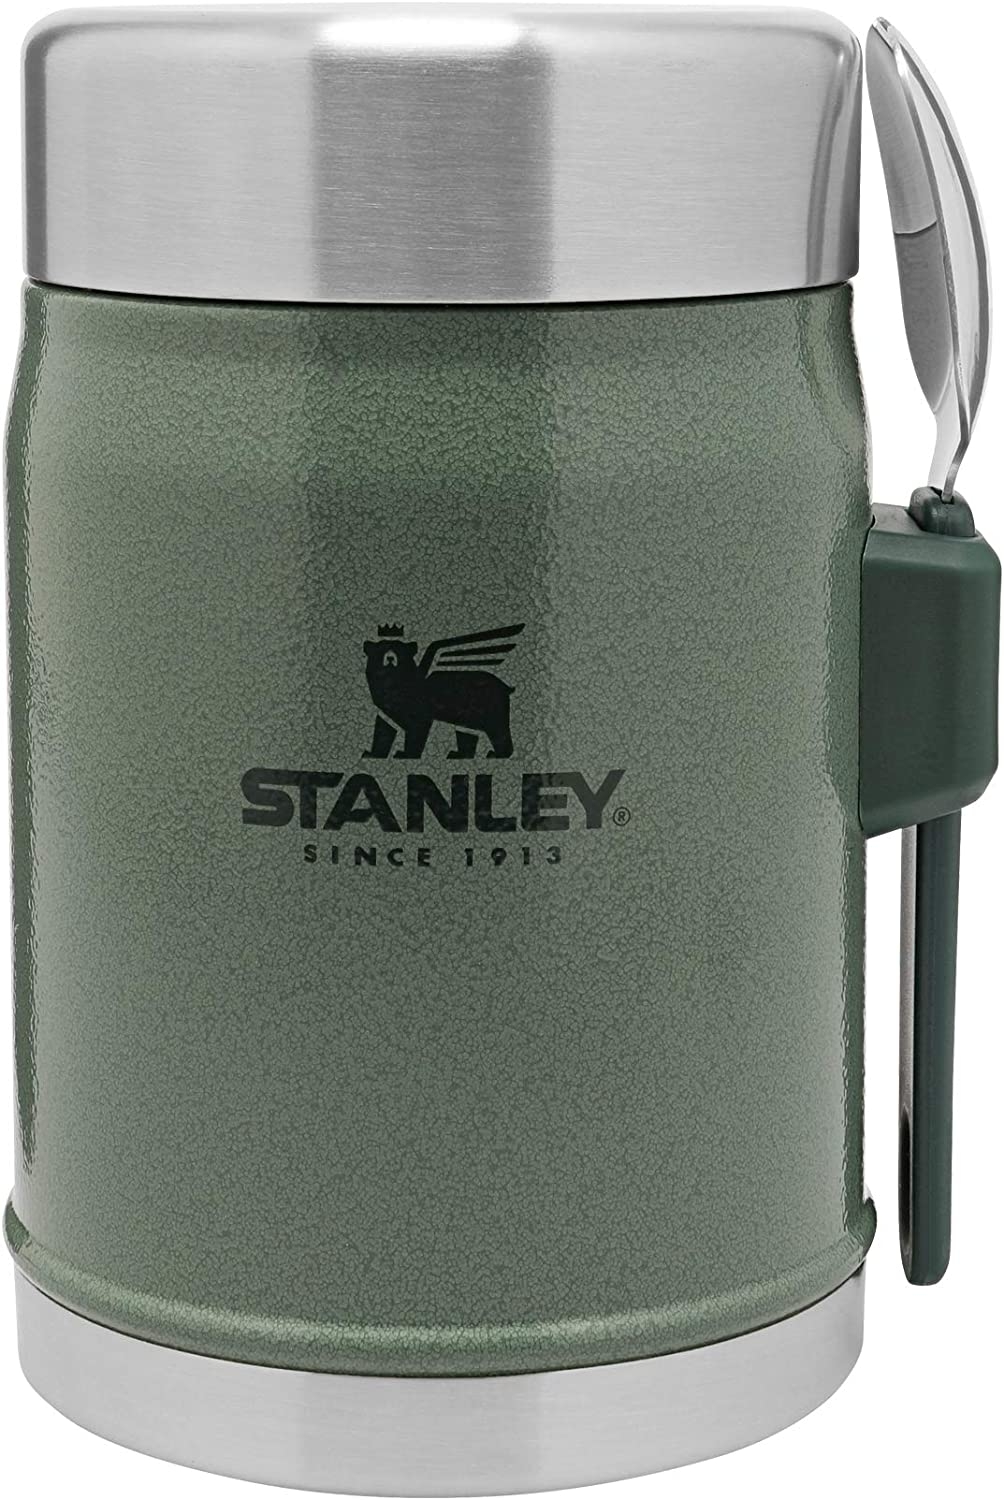 Stanley Legendary Vacuum Insulated Food Jar And Spork 14 Oz – Stainless Steel, BPA-Free – Keeps Food/Liquid Hot Or Cold –